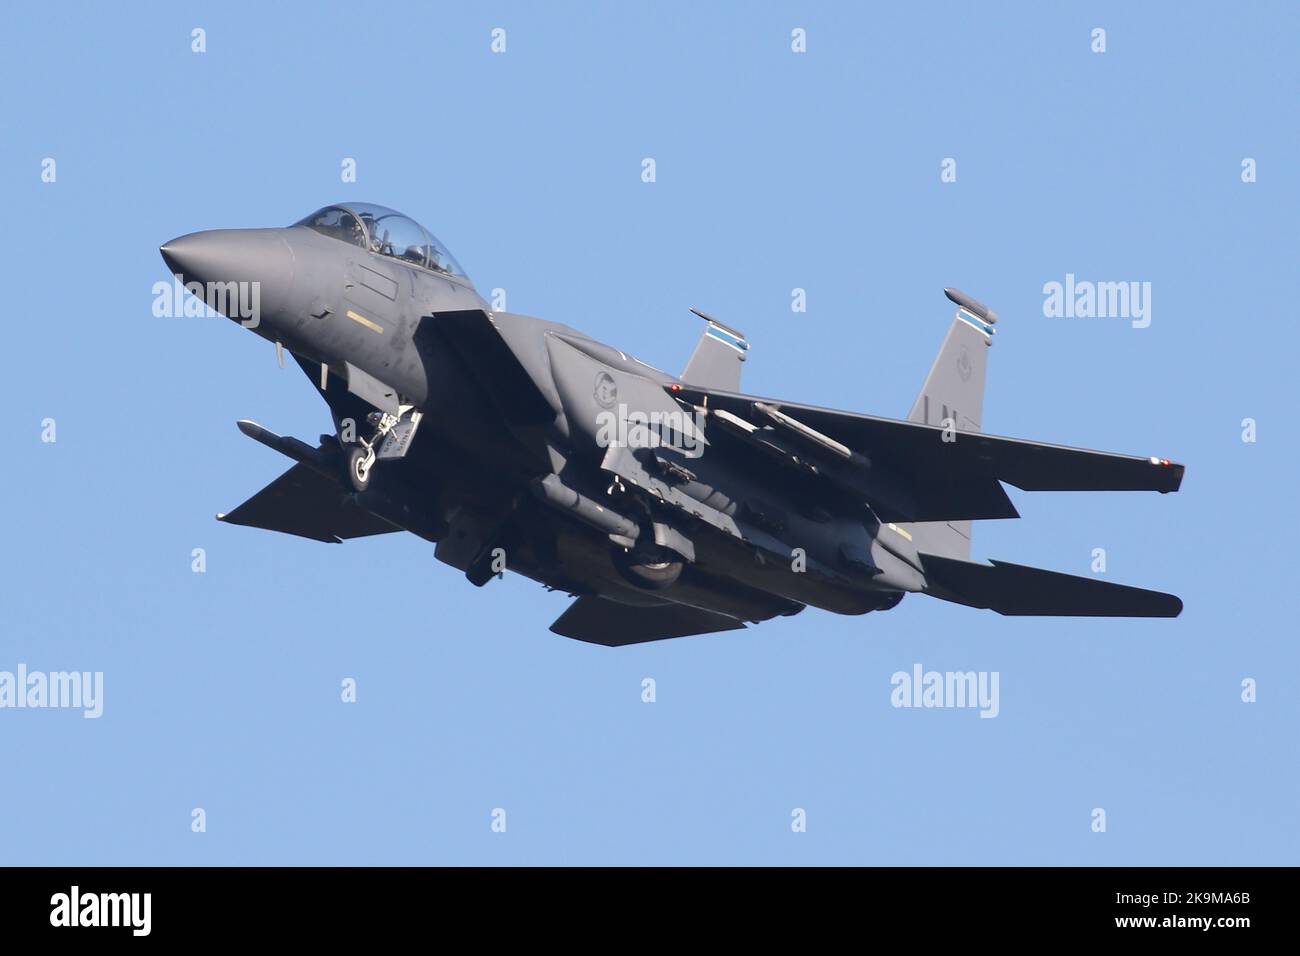 F-15E from the 48th Fighter Wing at RAF Lakenheath overshooting the runway. Stock Photo